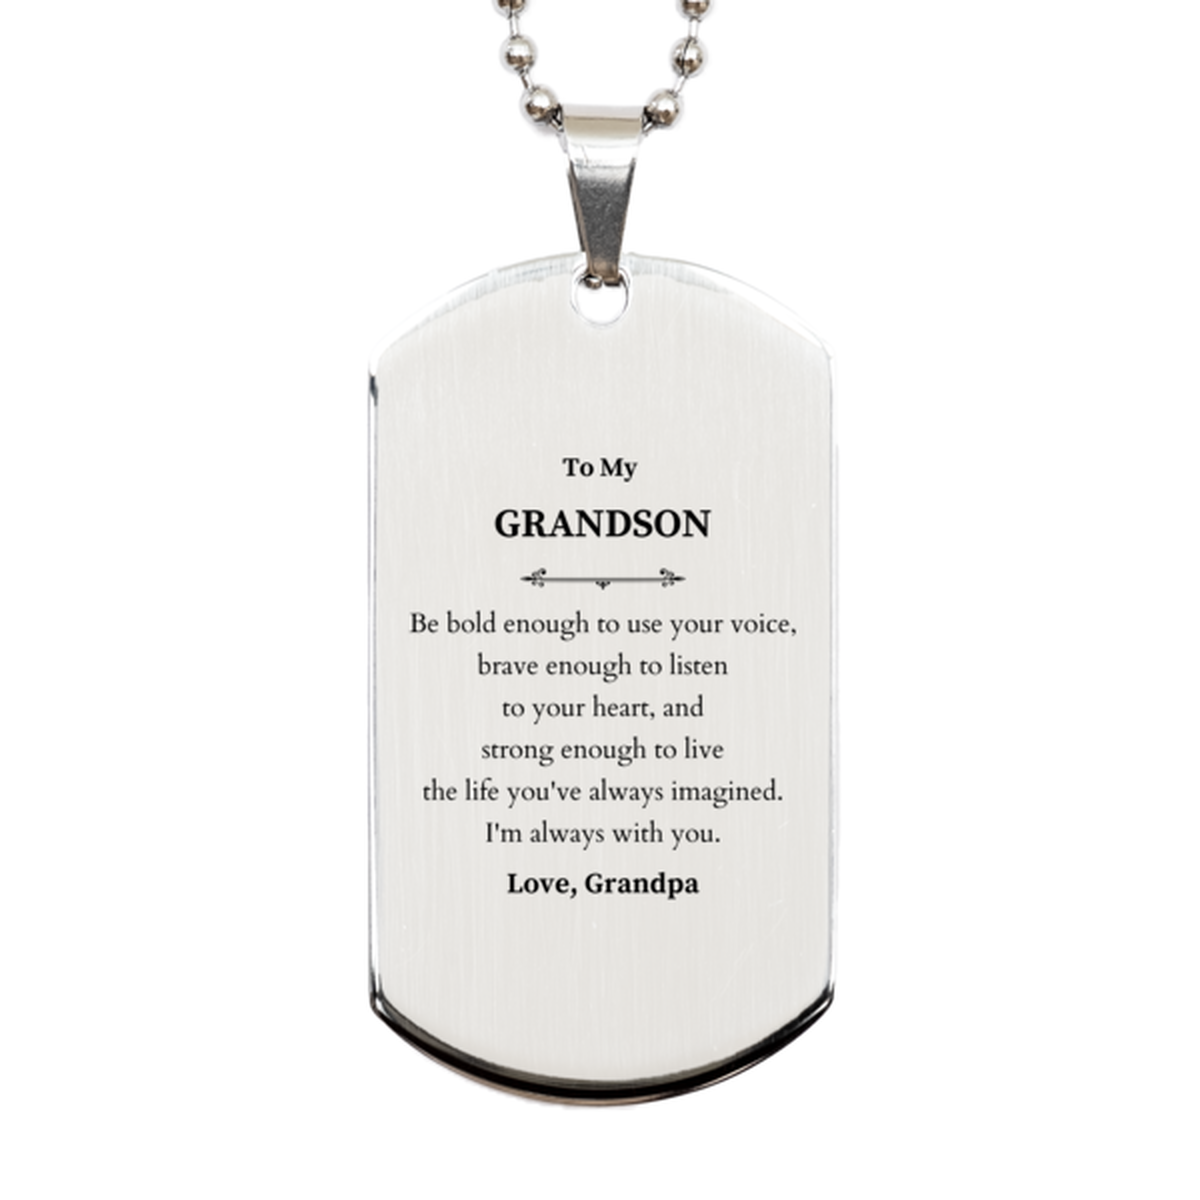 Keepsake Grandson Silver Dog Tag Gift Idea Graduation Christmas Birthday Grandson from Grandpa, Grandson Be bold enough to use your voice, brave enough to listen to your heart. Love, Grandpa